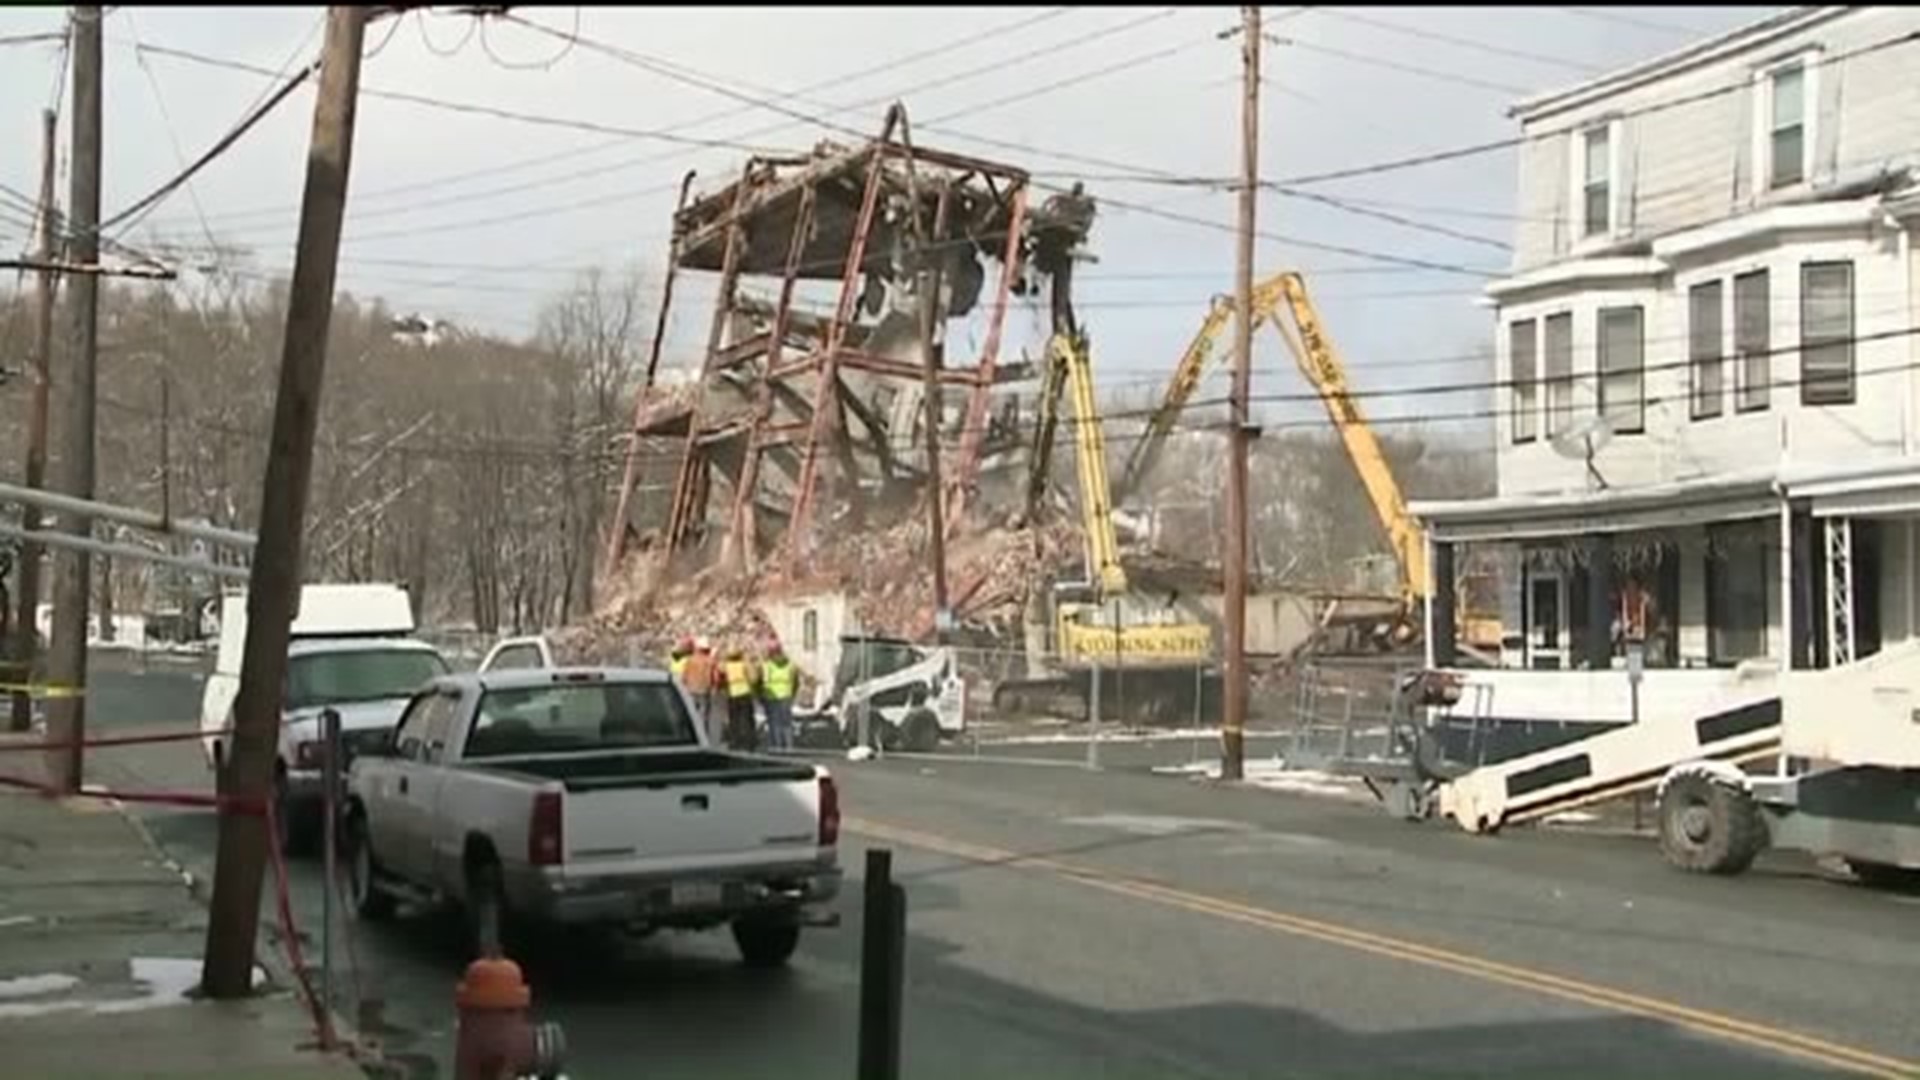 Watch the Old Kaier Brewery Come Crashing Down in Mahanoy City